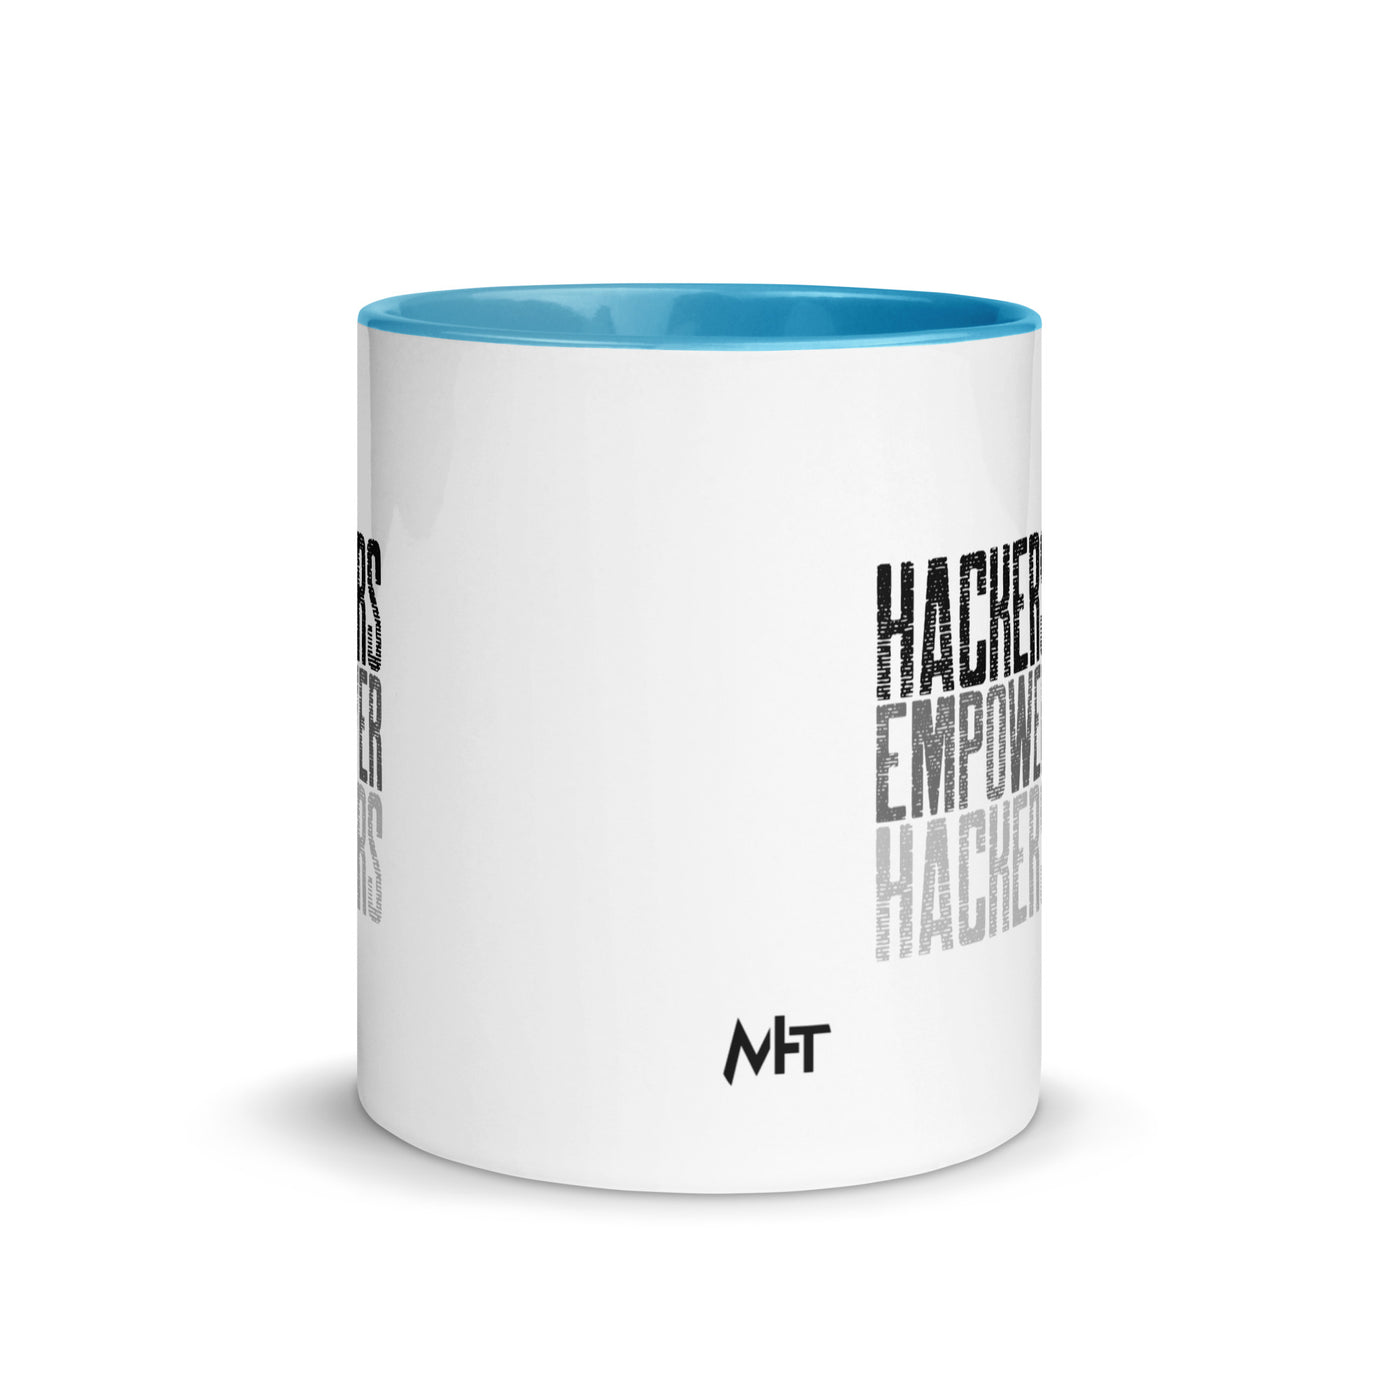 Hackers Empower Hackers V1 - Mug with Color Inside